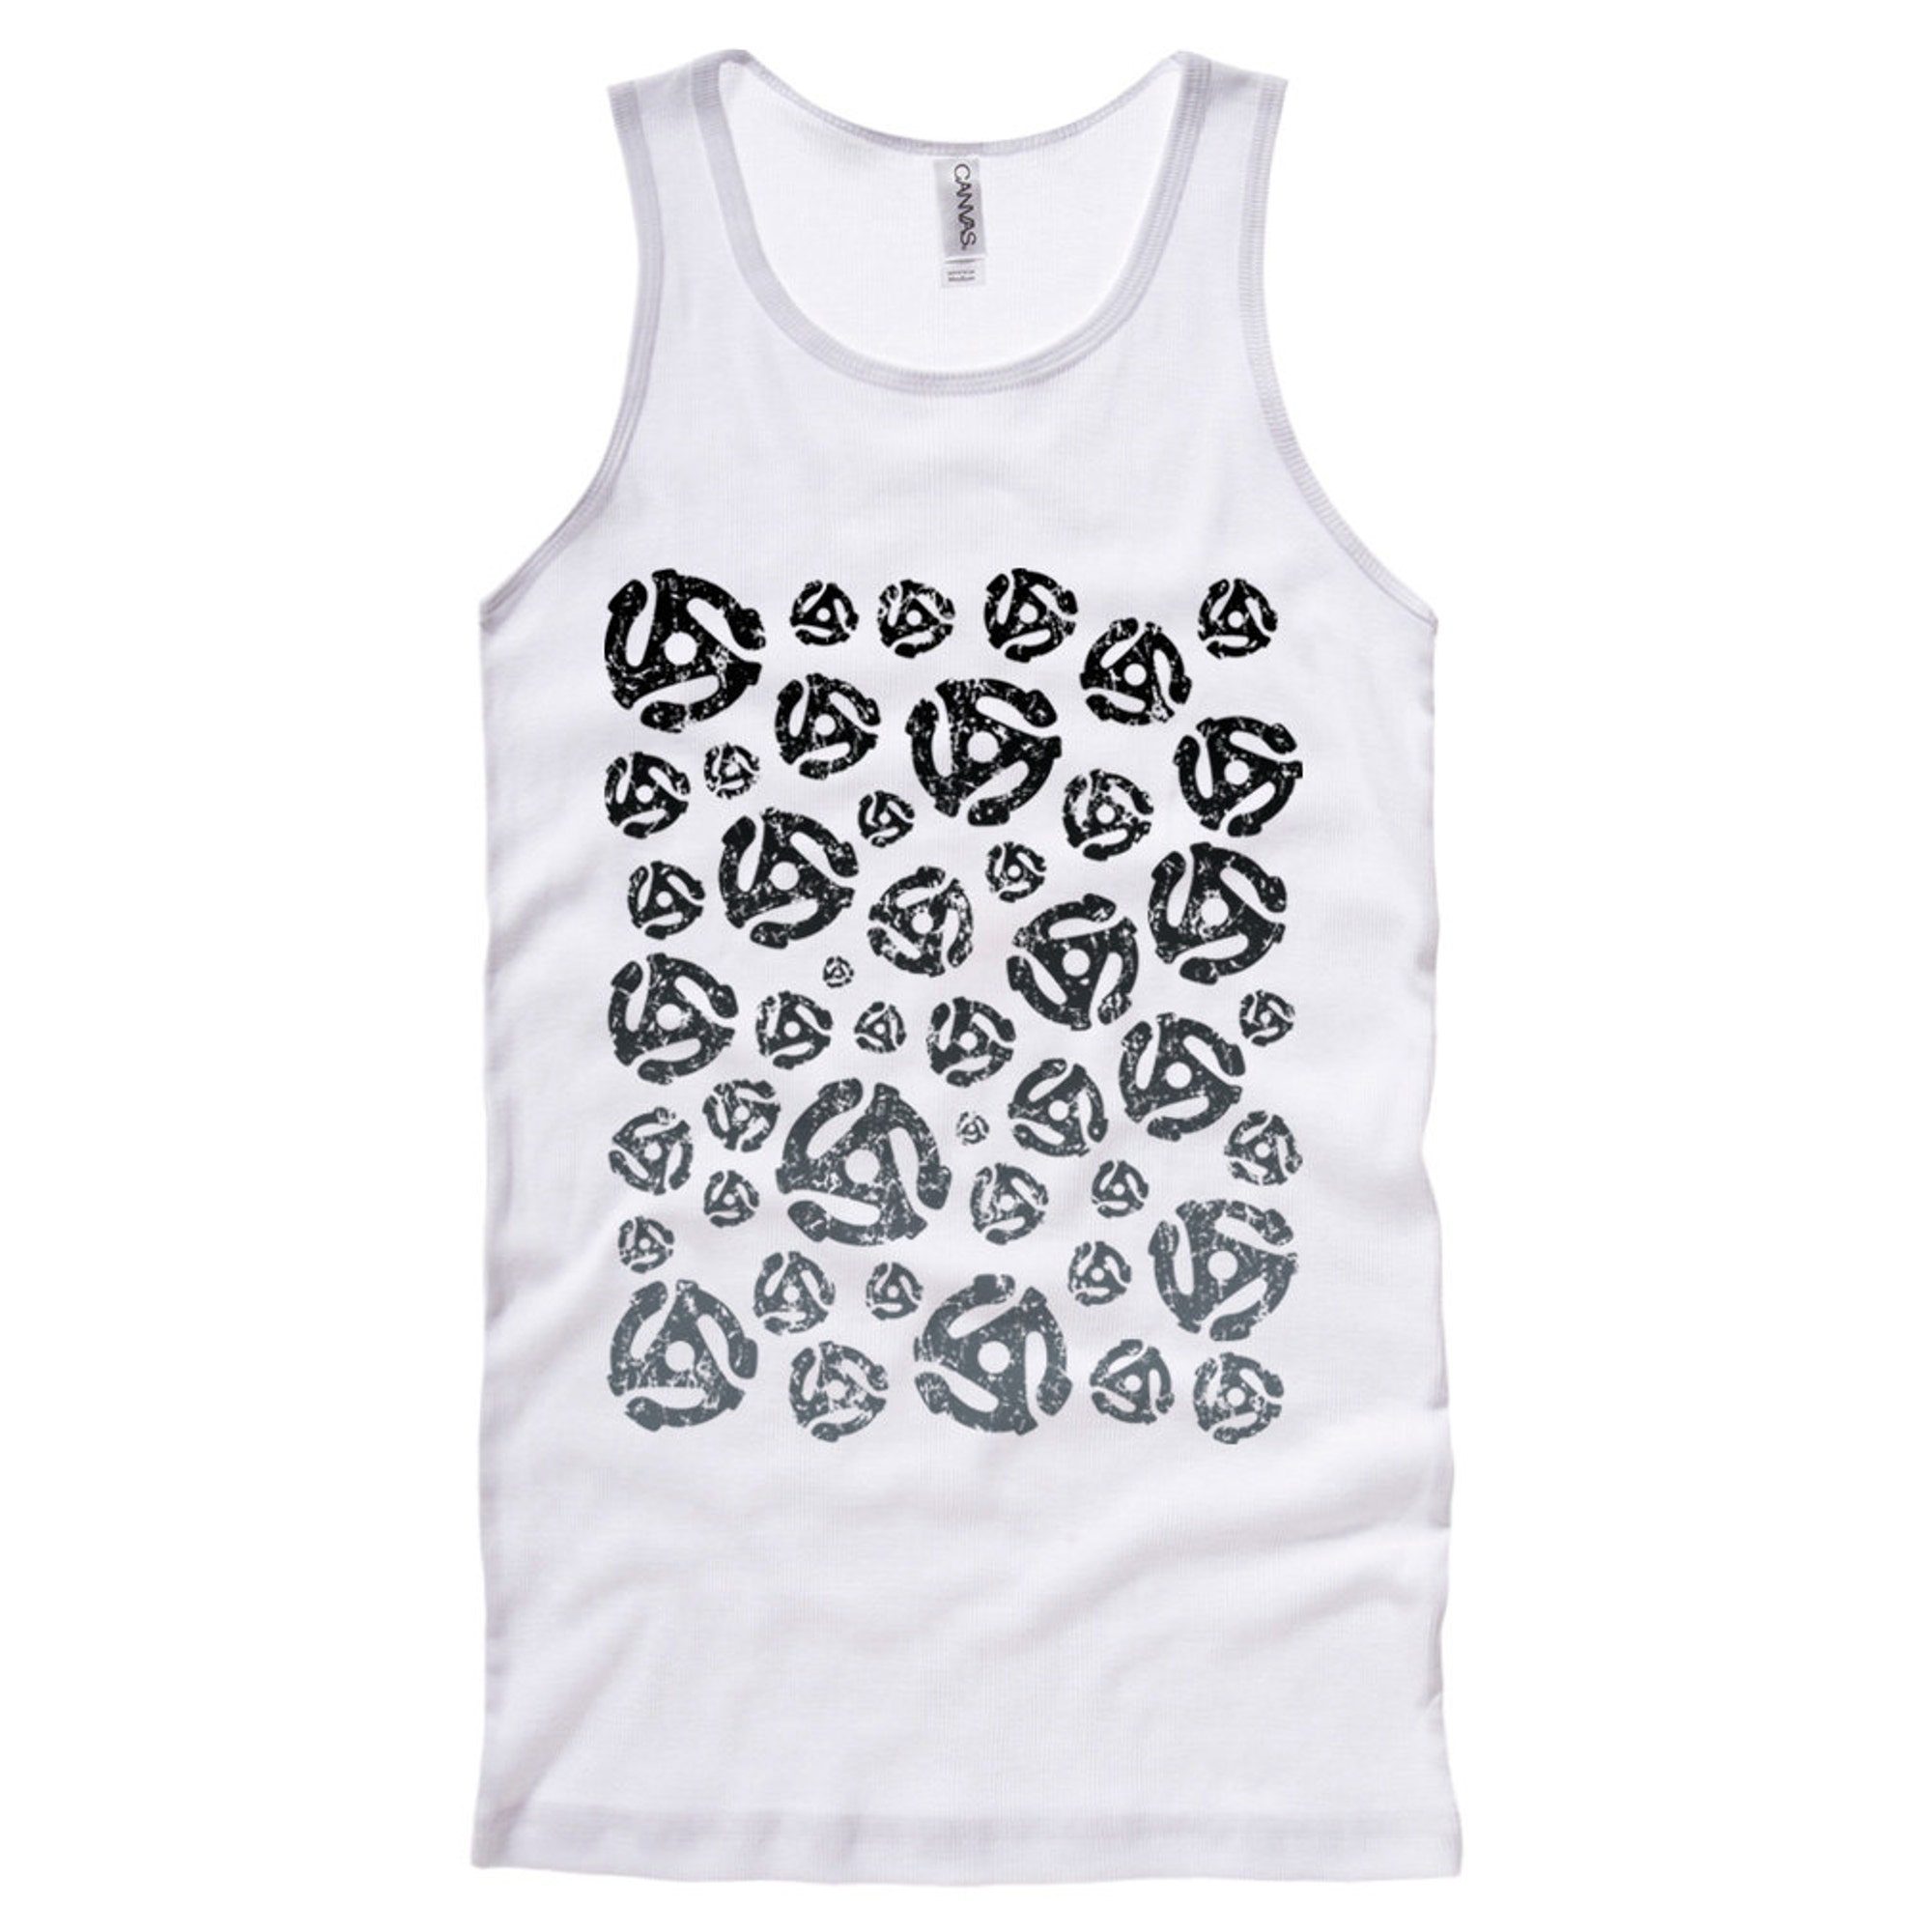 Discover Tank Top - 45 45s Grayscale